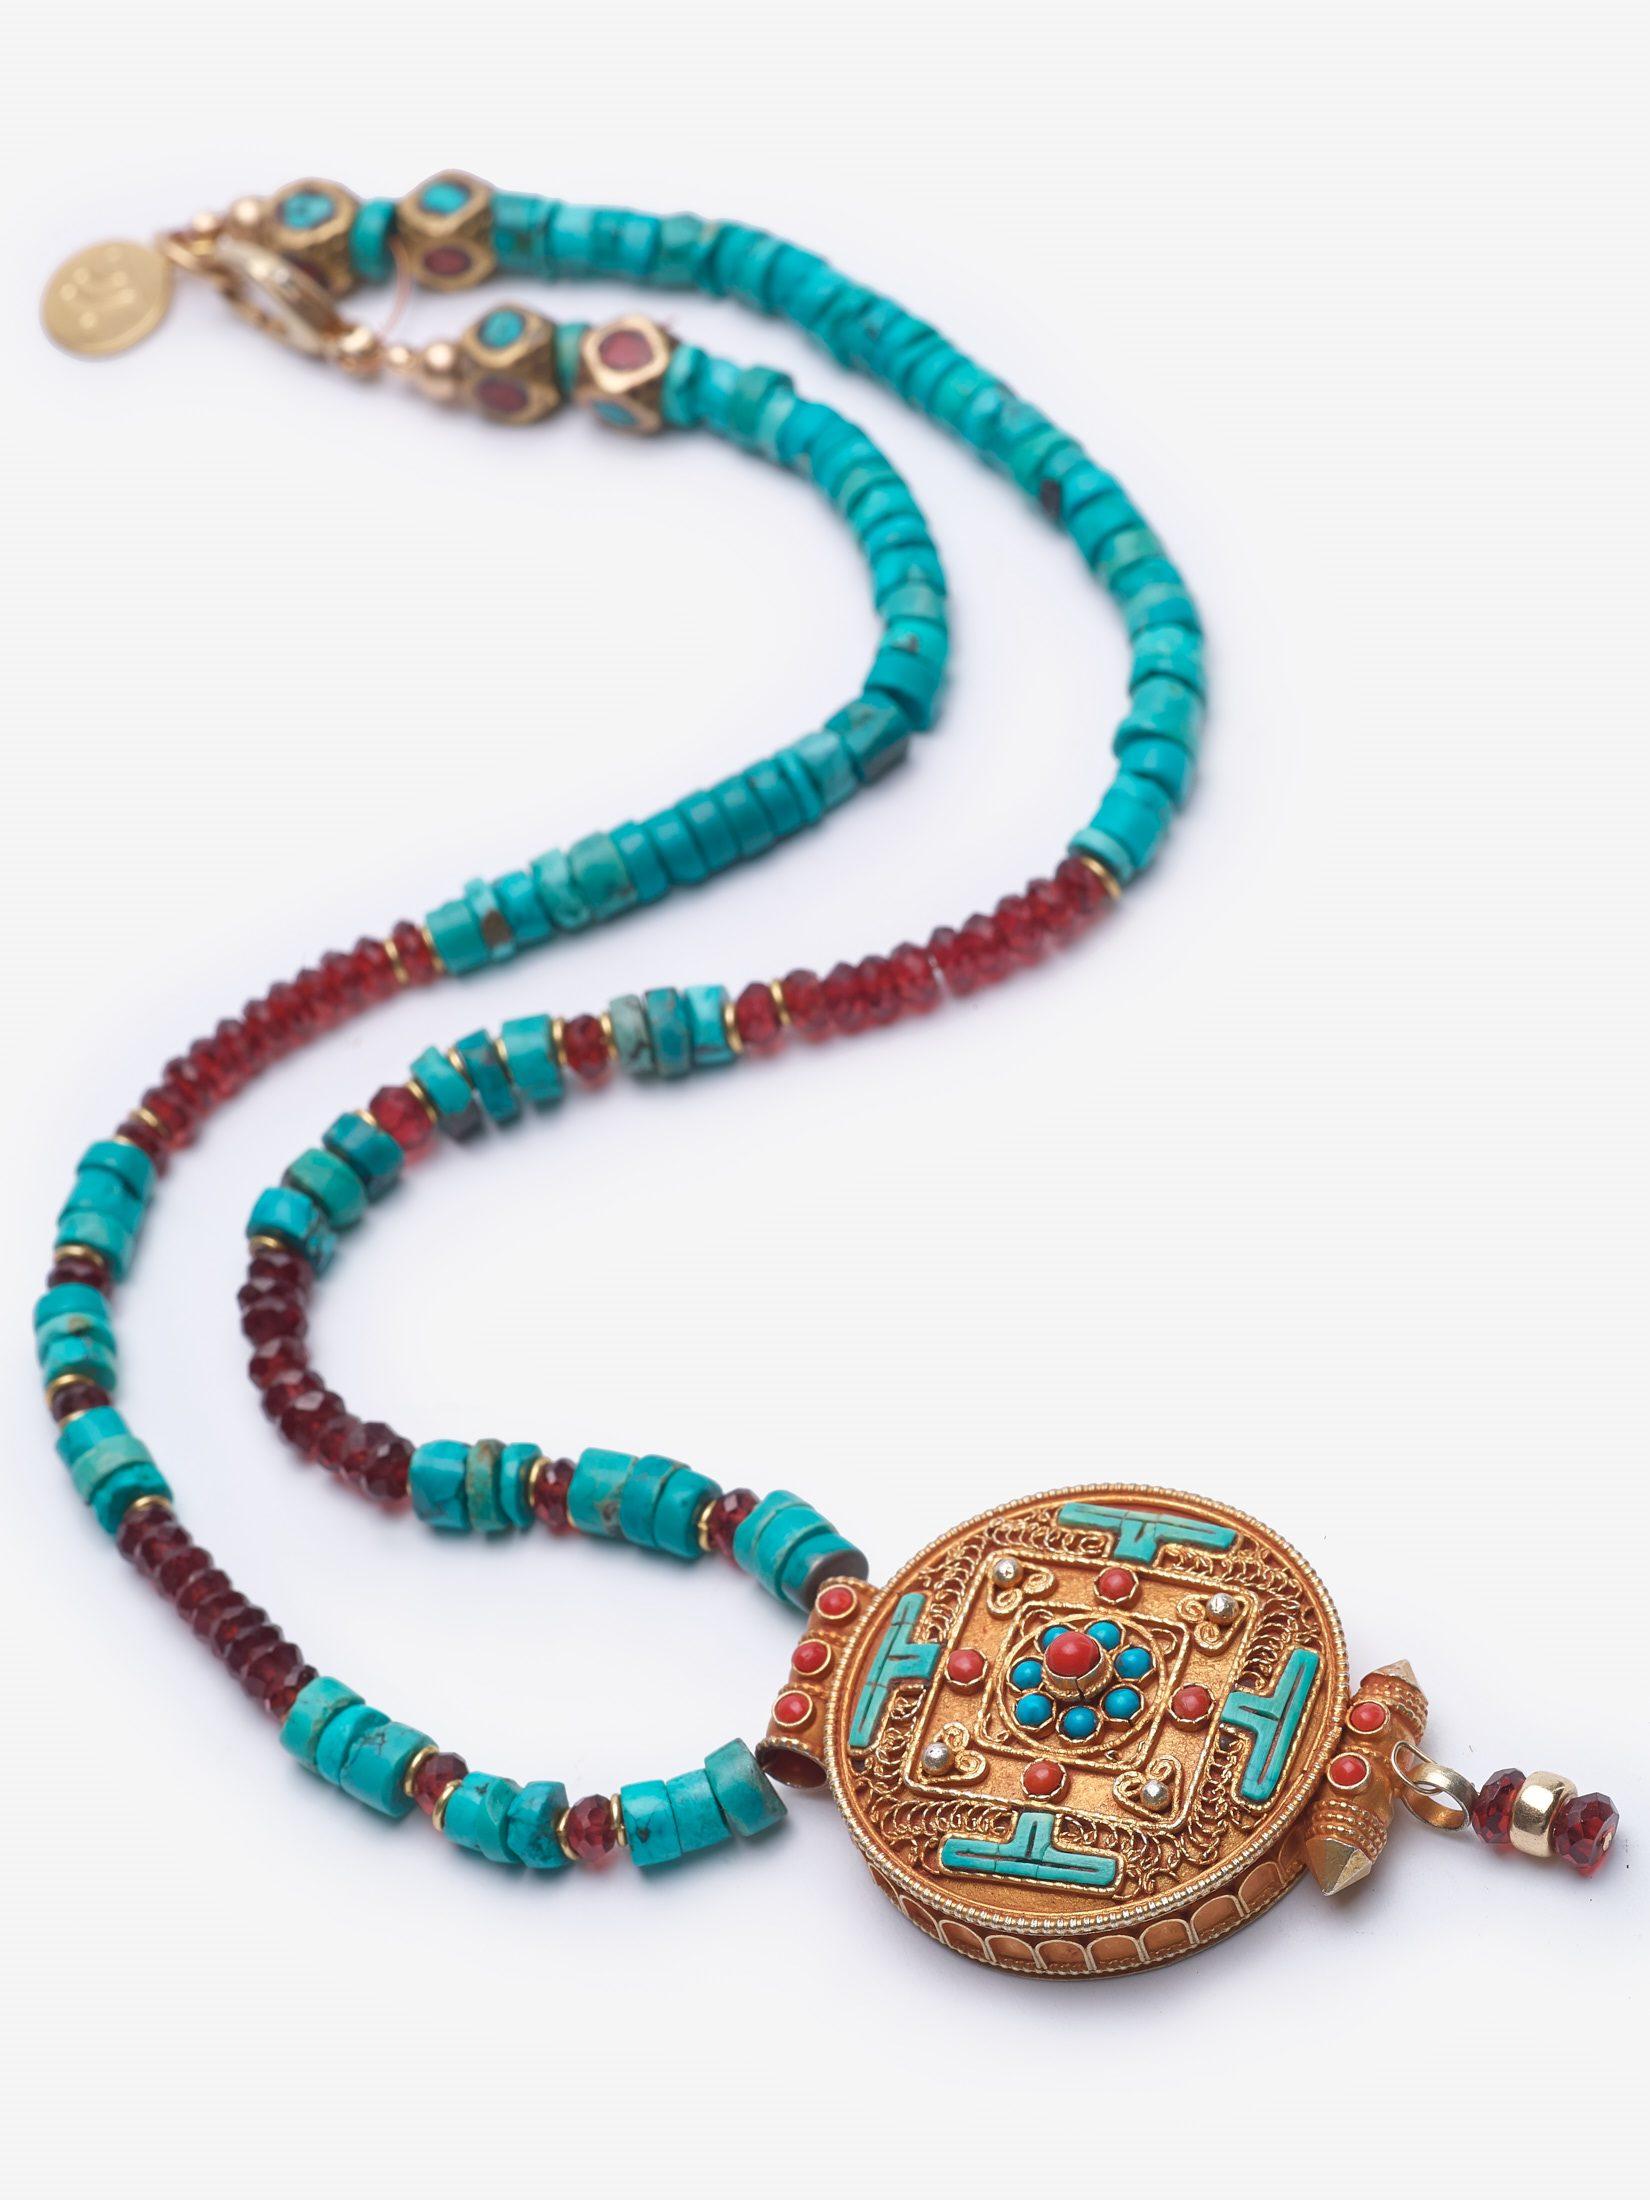 Mandalas represent the idea that life is never ending and have strong spiritual relevance. The Nepalese pendant is adorned with natural turquoise and coral. The statement necklace is comprised legendary stones, turquoise and garnet.